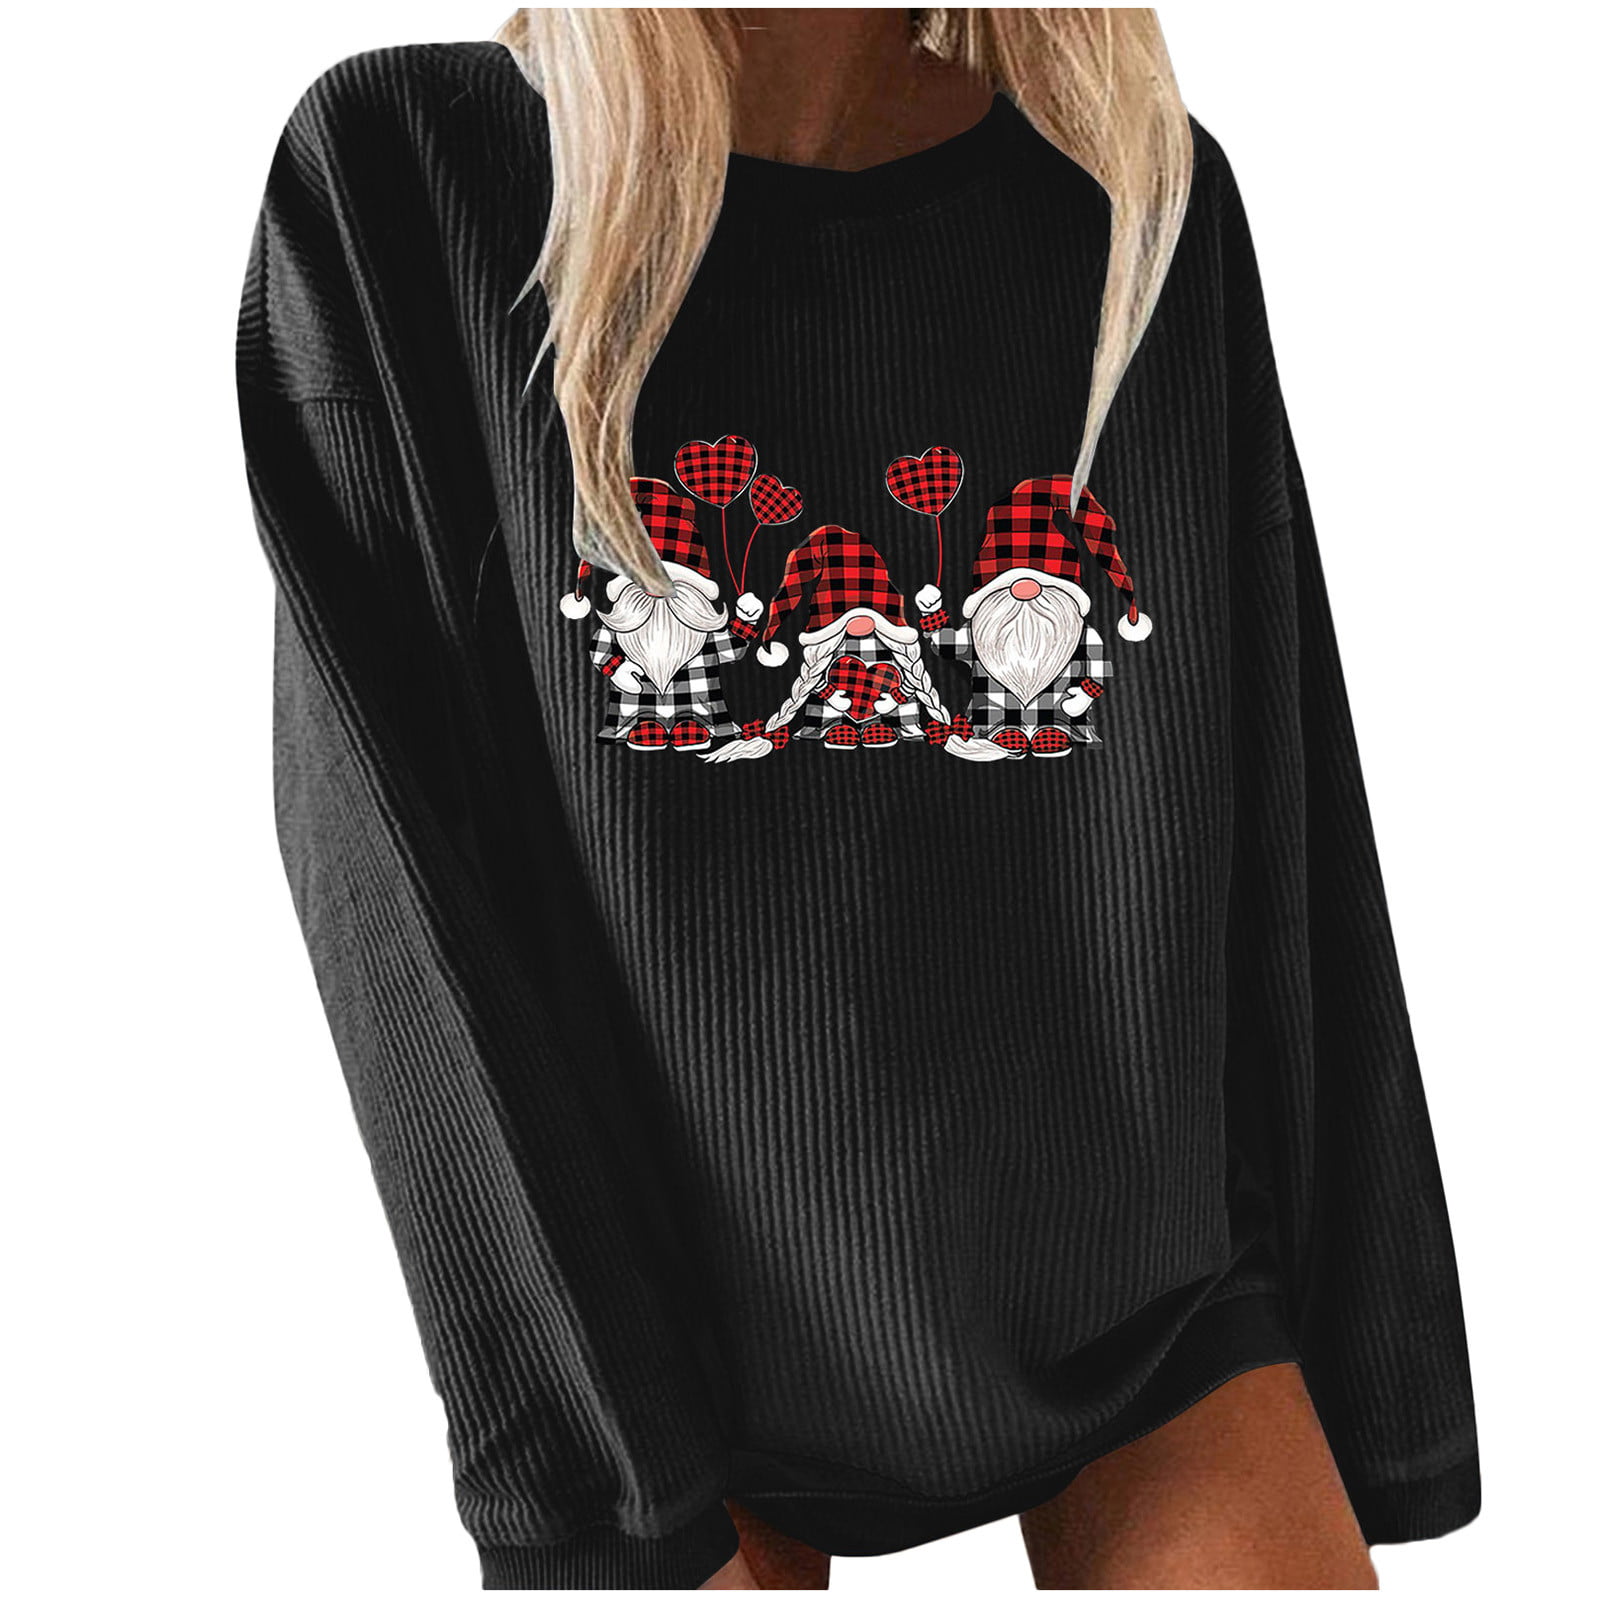 Christmas Hoodies for Women Cowl Neck Pullover Tunic Pocket Christmas Gnomes Print Tops Casual Long Sleeve Shirts Blouse 